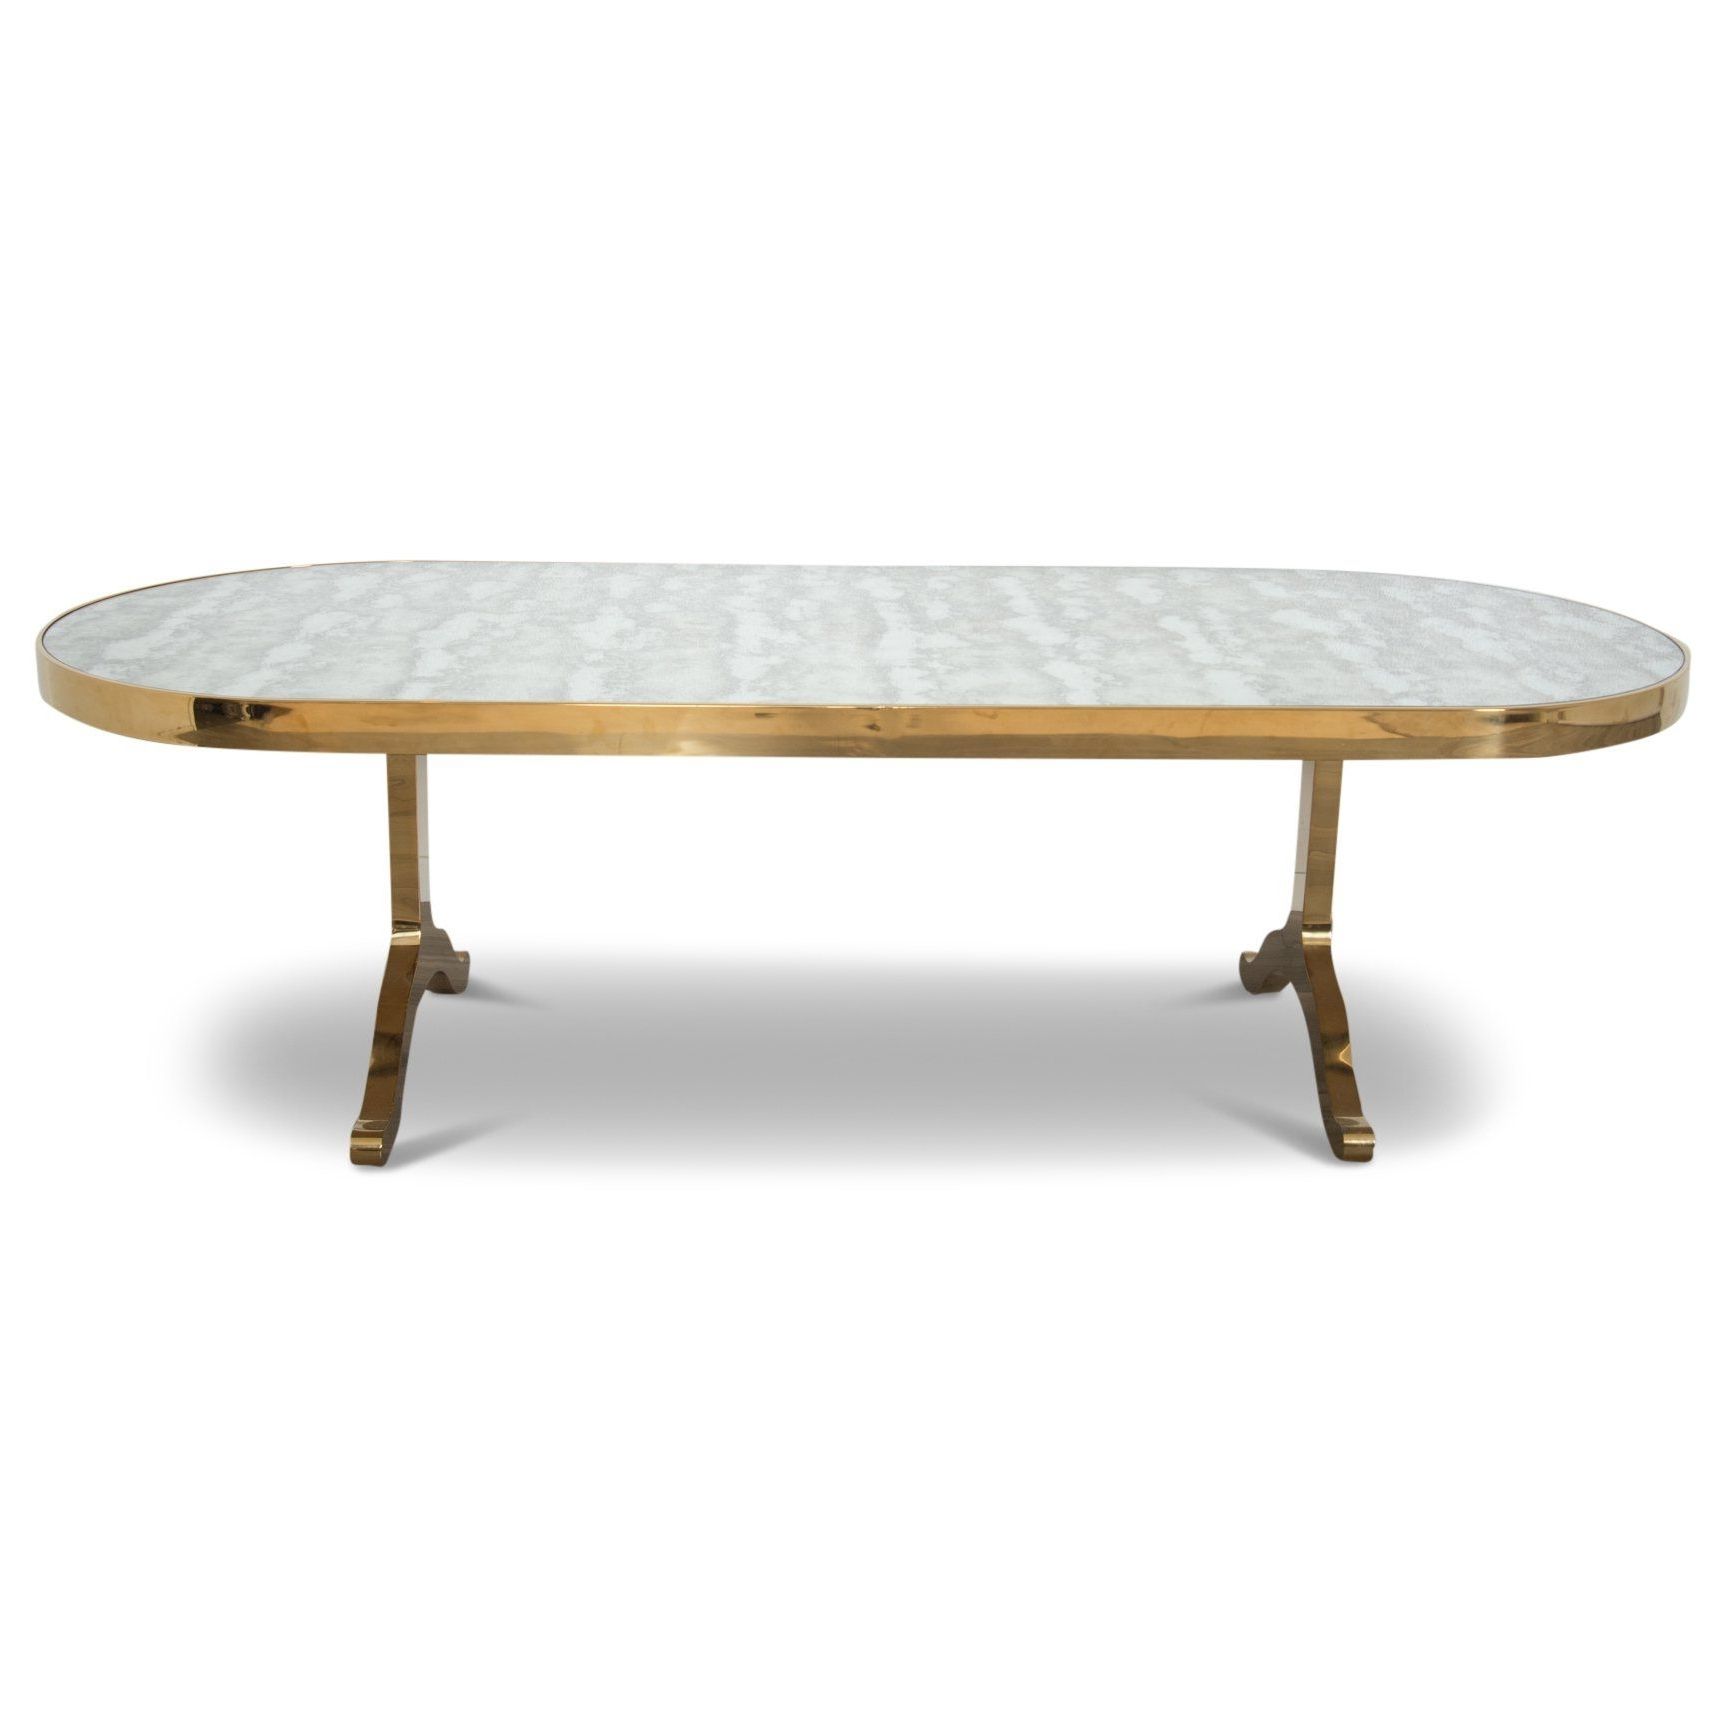 Well Liked Antique Mirror Dining Tables Pertaining To Ibiza Oval Dining Table With Antique Mirror (View 10 of 25)